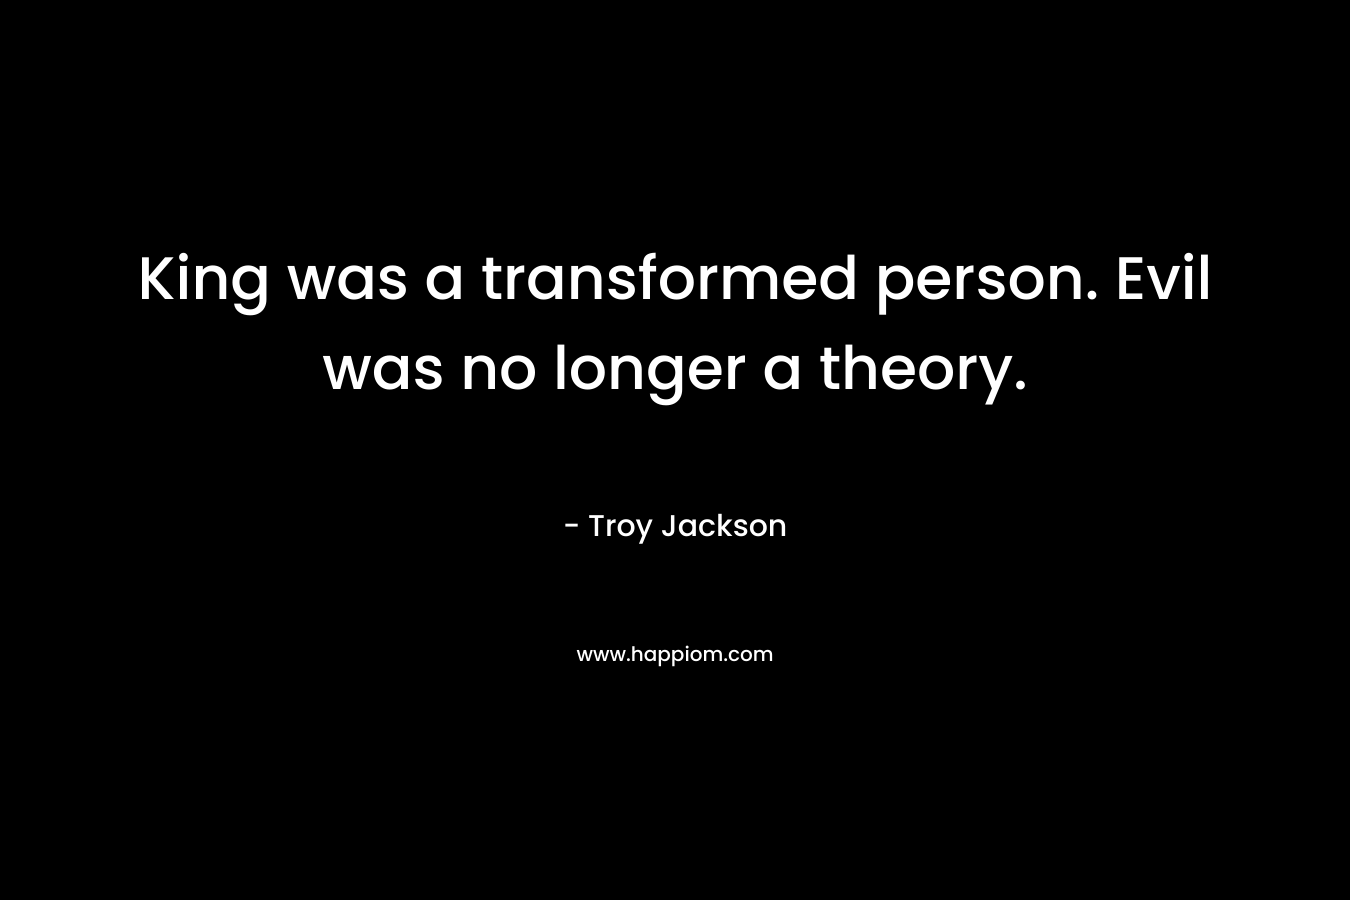 King was a transformed person. Evil was no longer a theory.